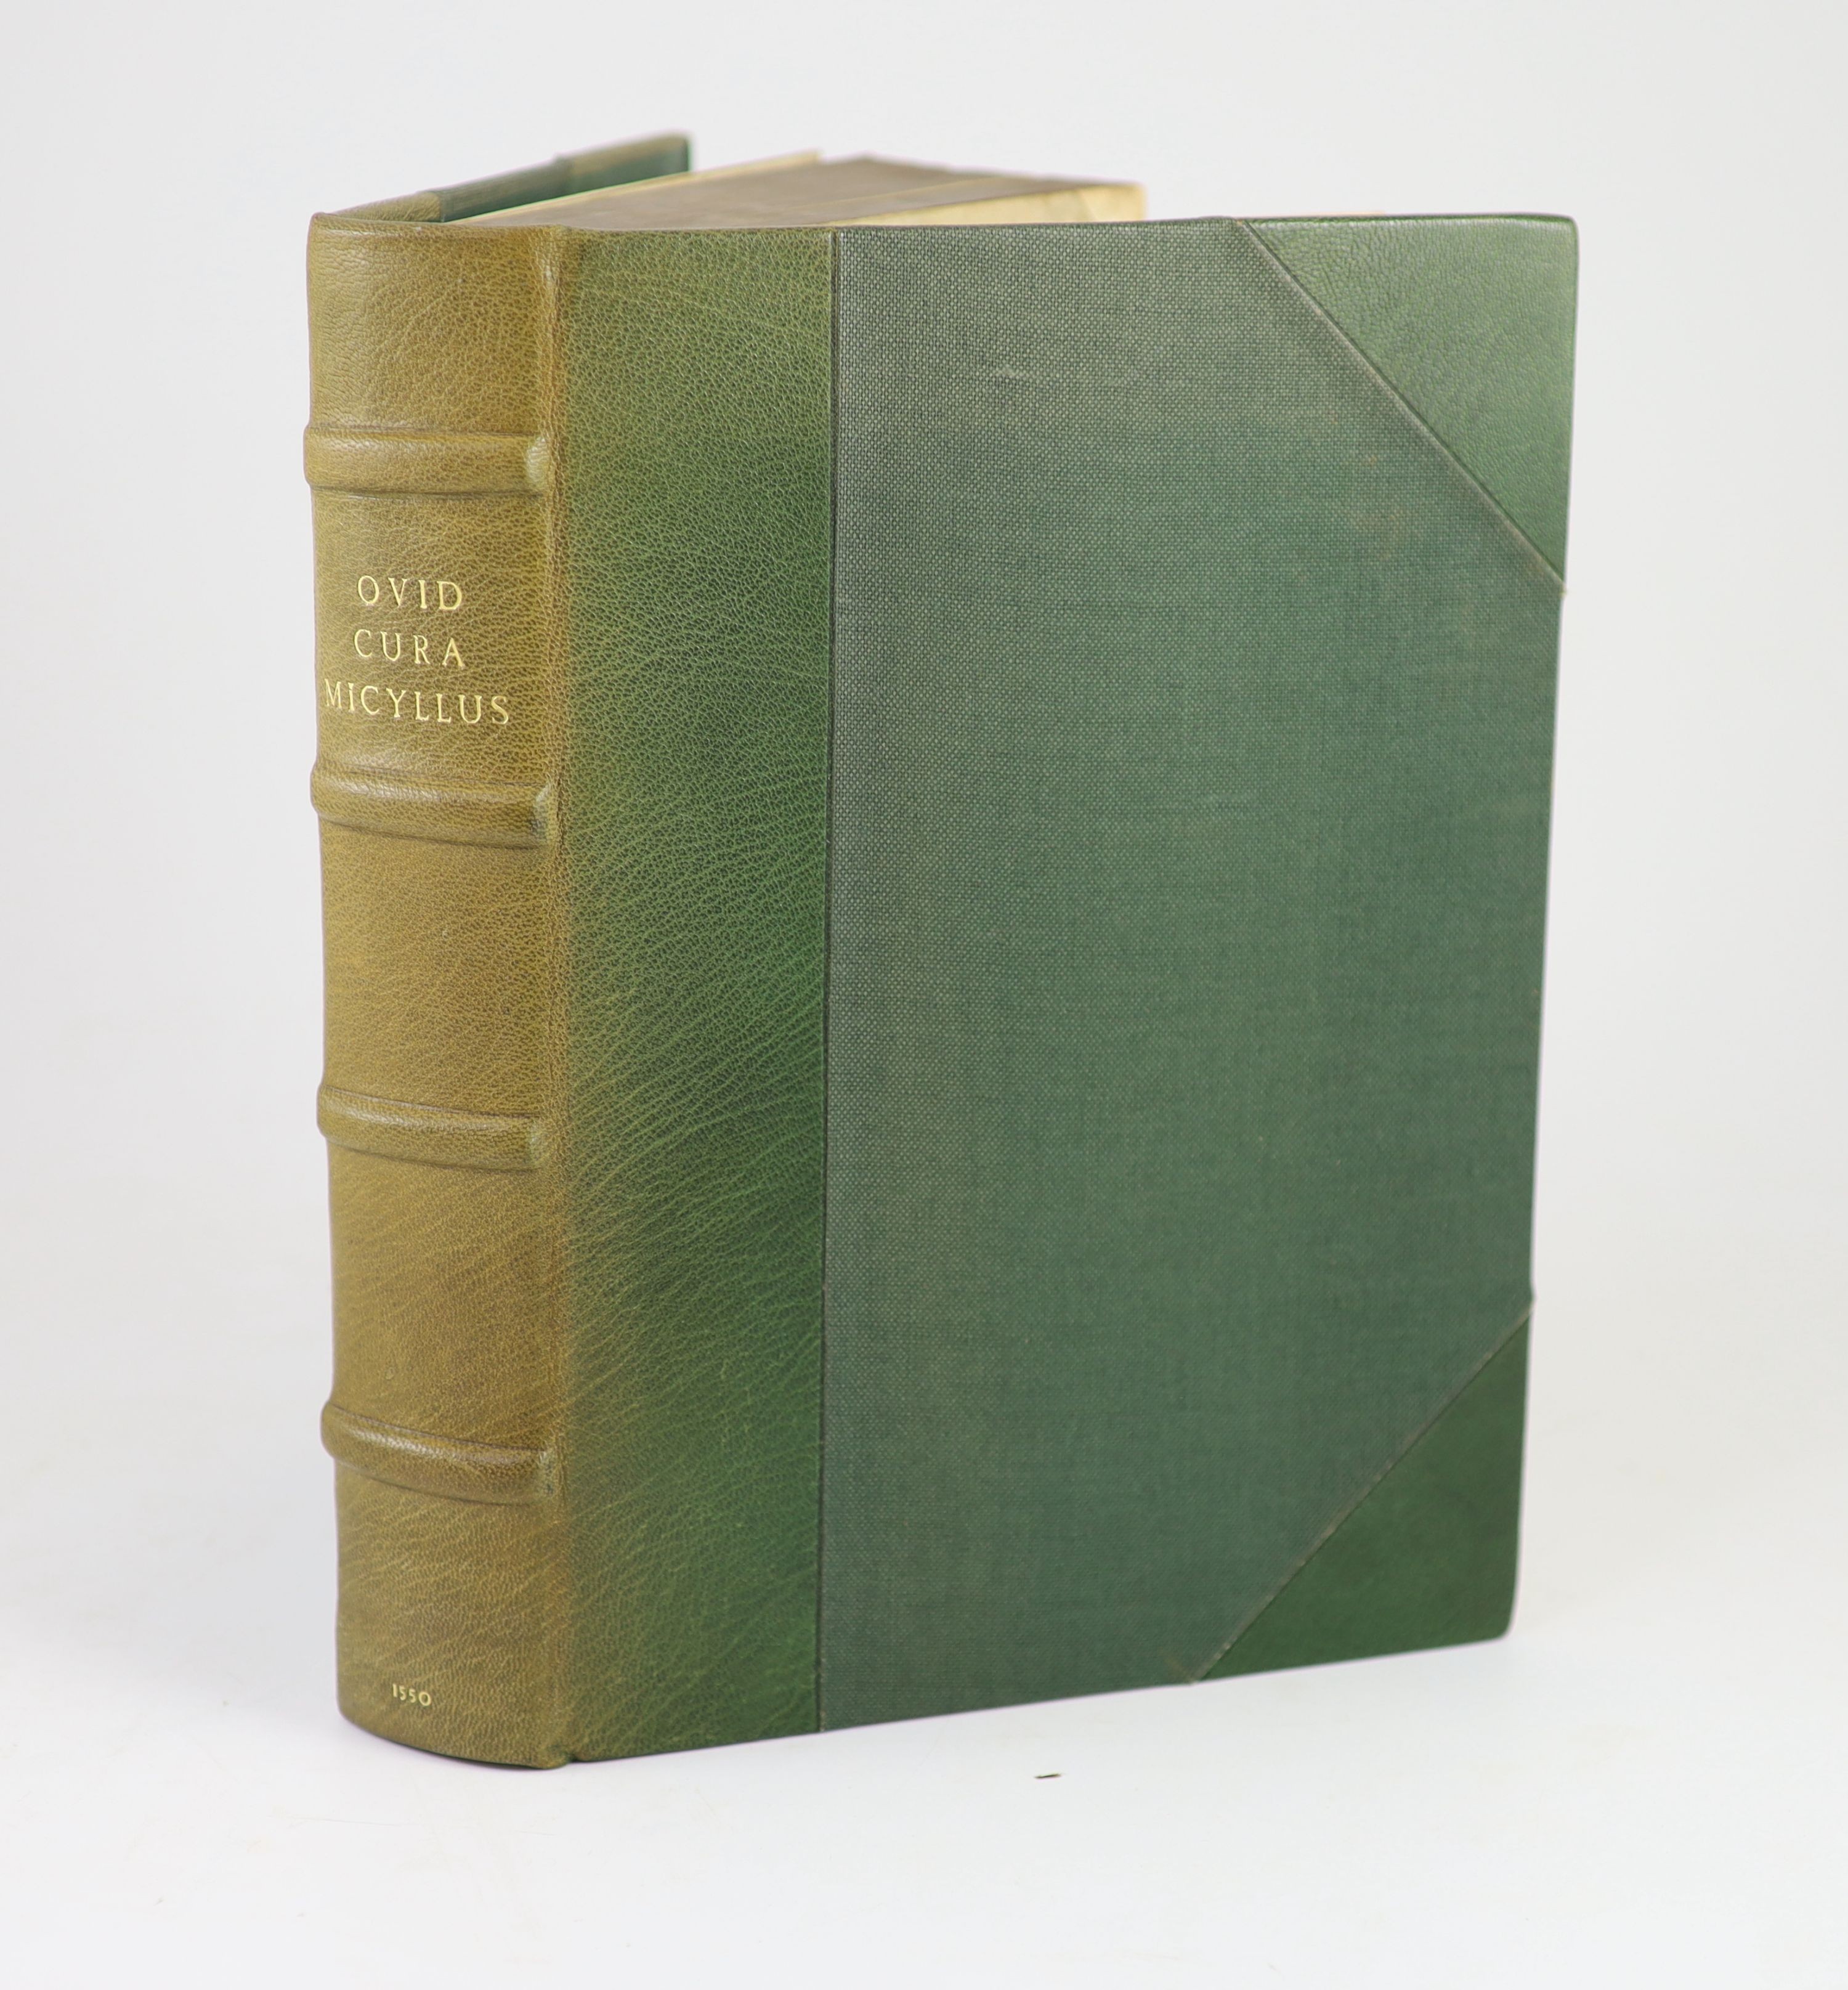 [OVID - Fastorum Libri VI. Tristium V. De Ponto IIII. In Ibin.....] ie. lacks title. historiated and decorated initials; (6), 793 and (10) pp.; newly rebound green half morocco and cloth, gilt lettered panelled spine, fo